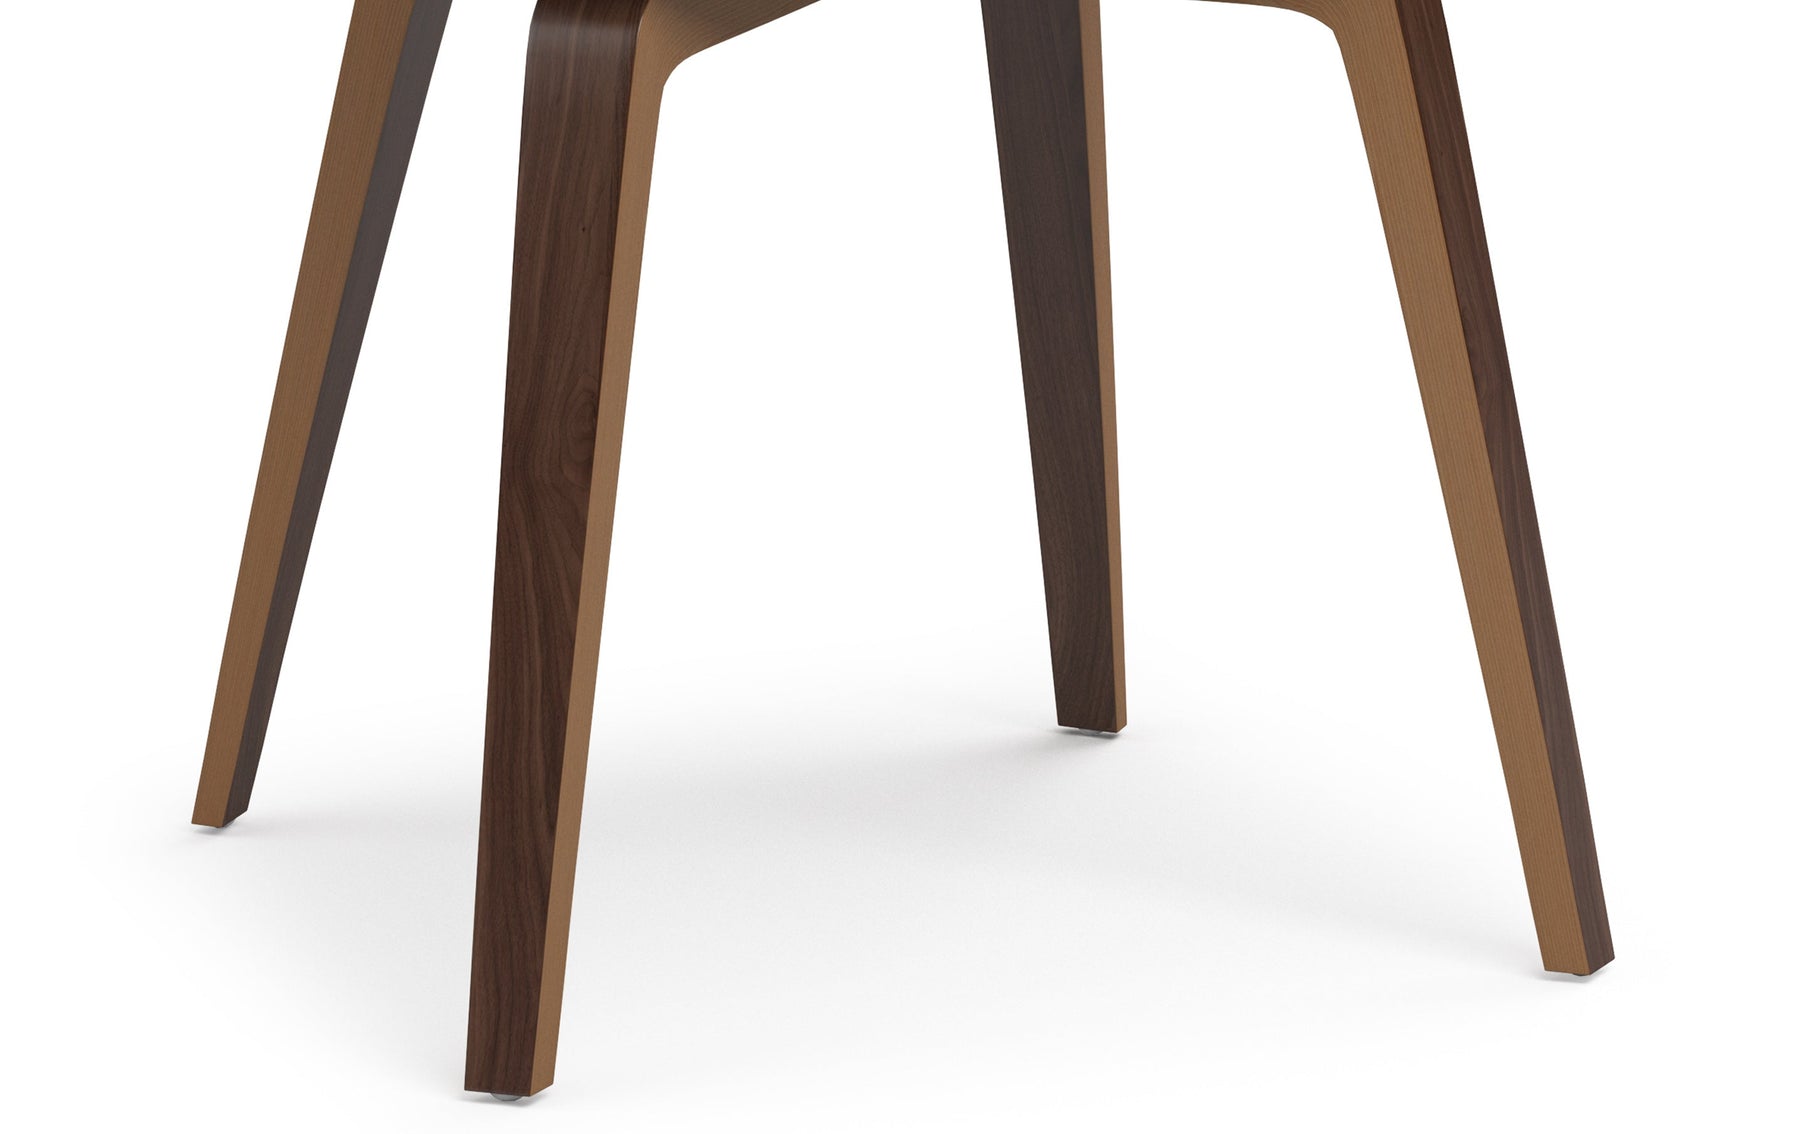 Distressed Brown Walnut Distressed Vegan Leather | Lowell Dining Chair